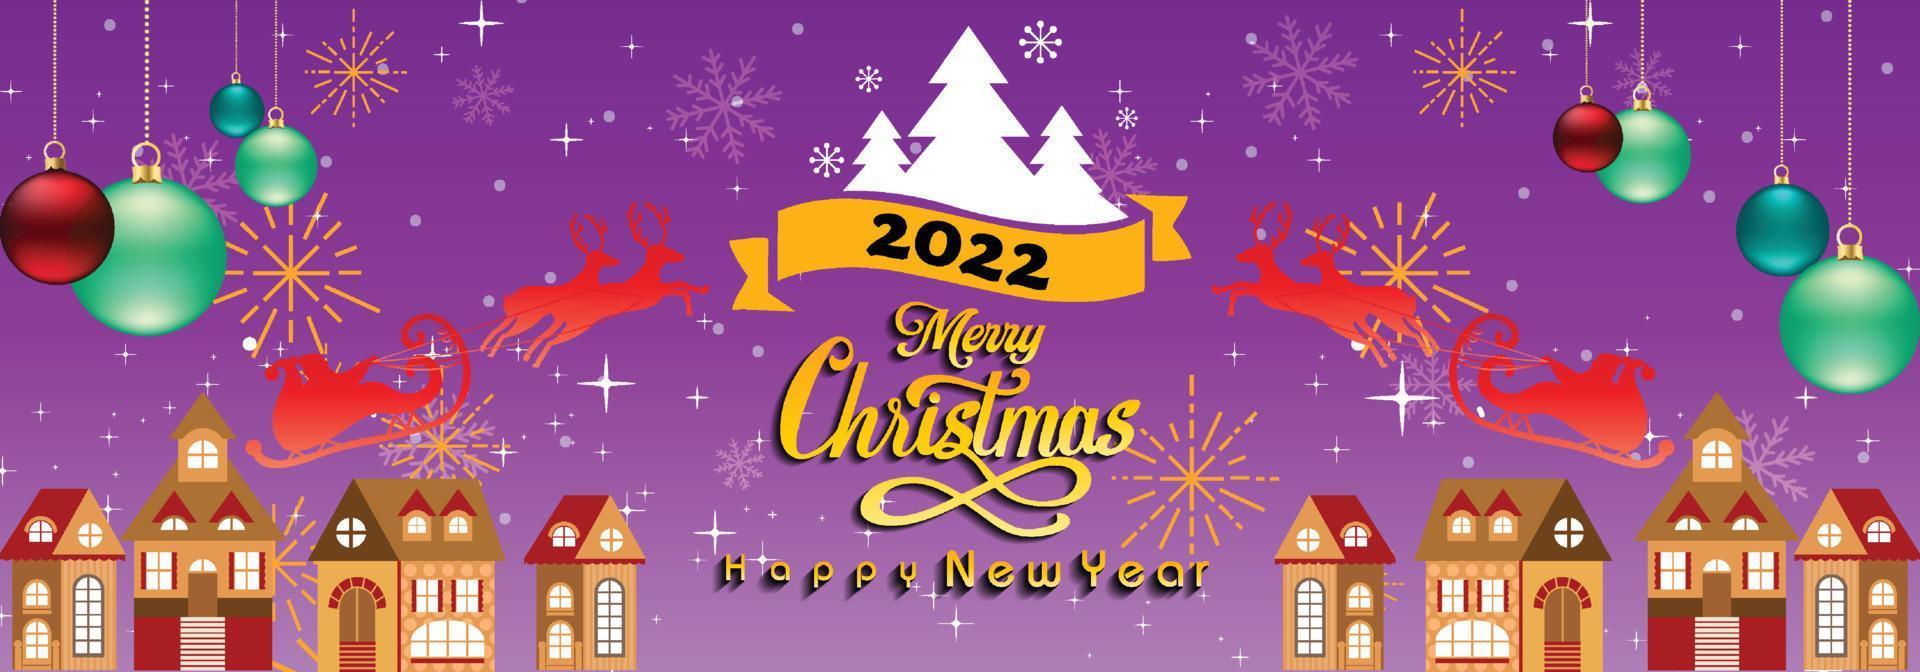 Merry Christmas and Happy New Year greeting cards.background, Modern design for advertising, branding, greeting cards, covers, posters, banners. Vector illustration